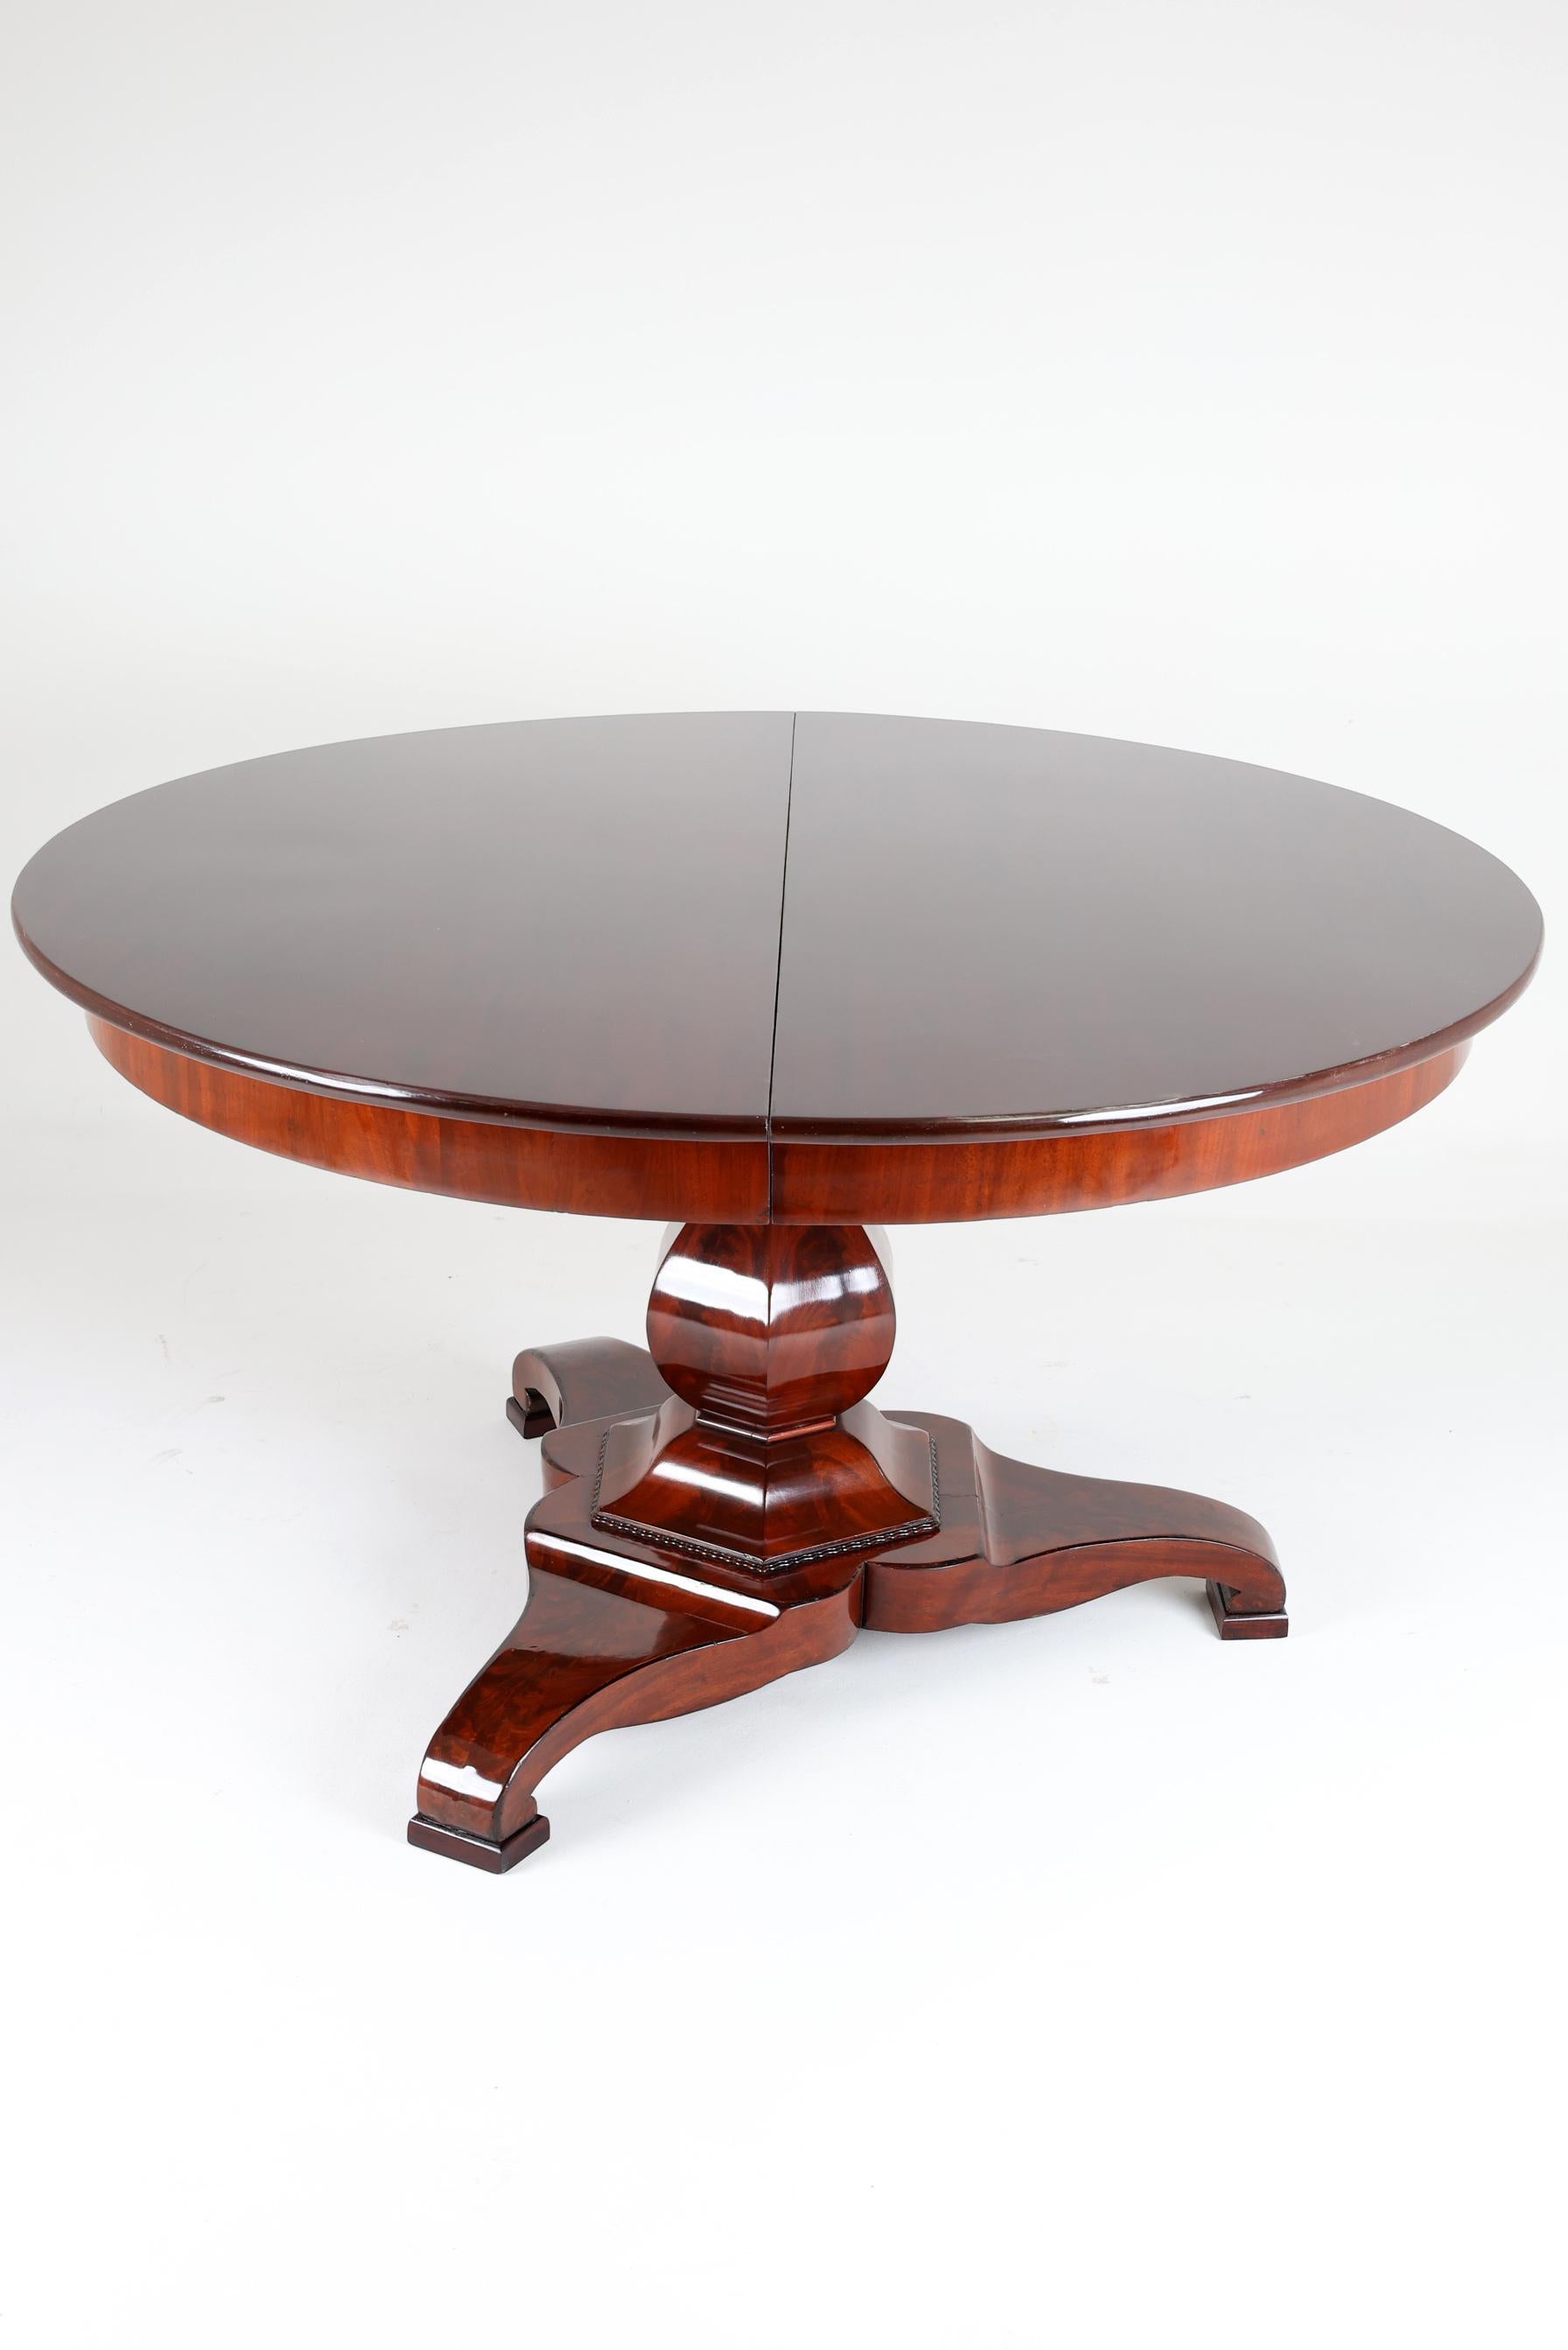 19th Century Mahogany Dining Table, 173 inches Long
Nederland, 1830-1835

Spectacular dining  table supported by a mahogany veneered large center pedestal. This round form table with diameter 140cm,  extends to accept six leaves (each 50 cm). The